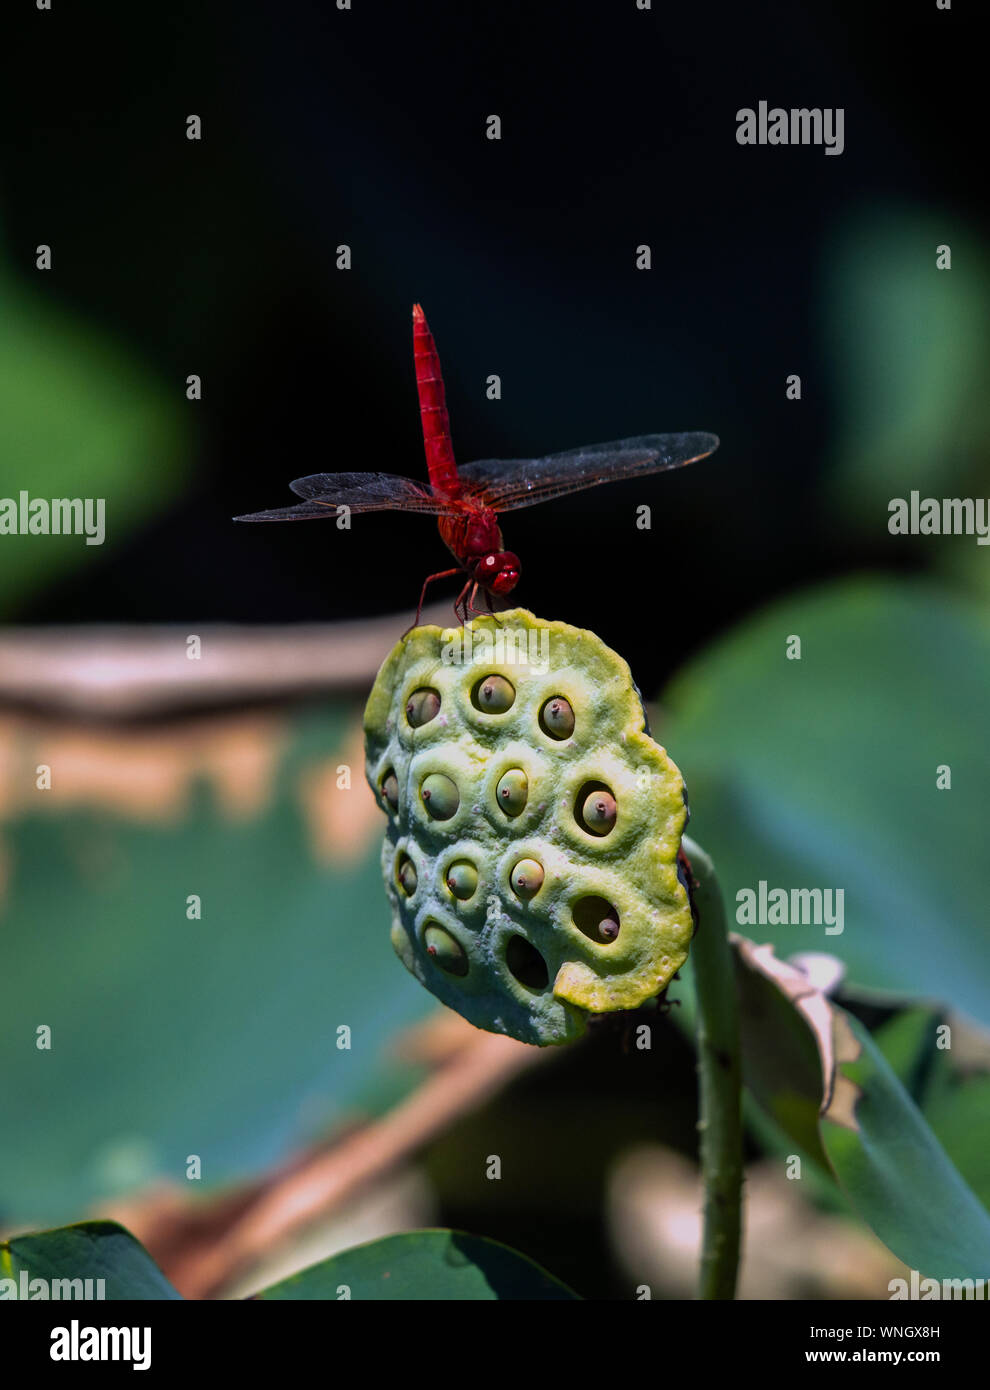 red dragonfly stopped on the seedpod of the lotus Stock Photo